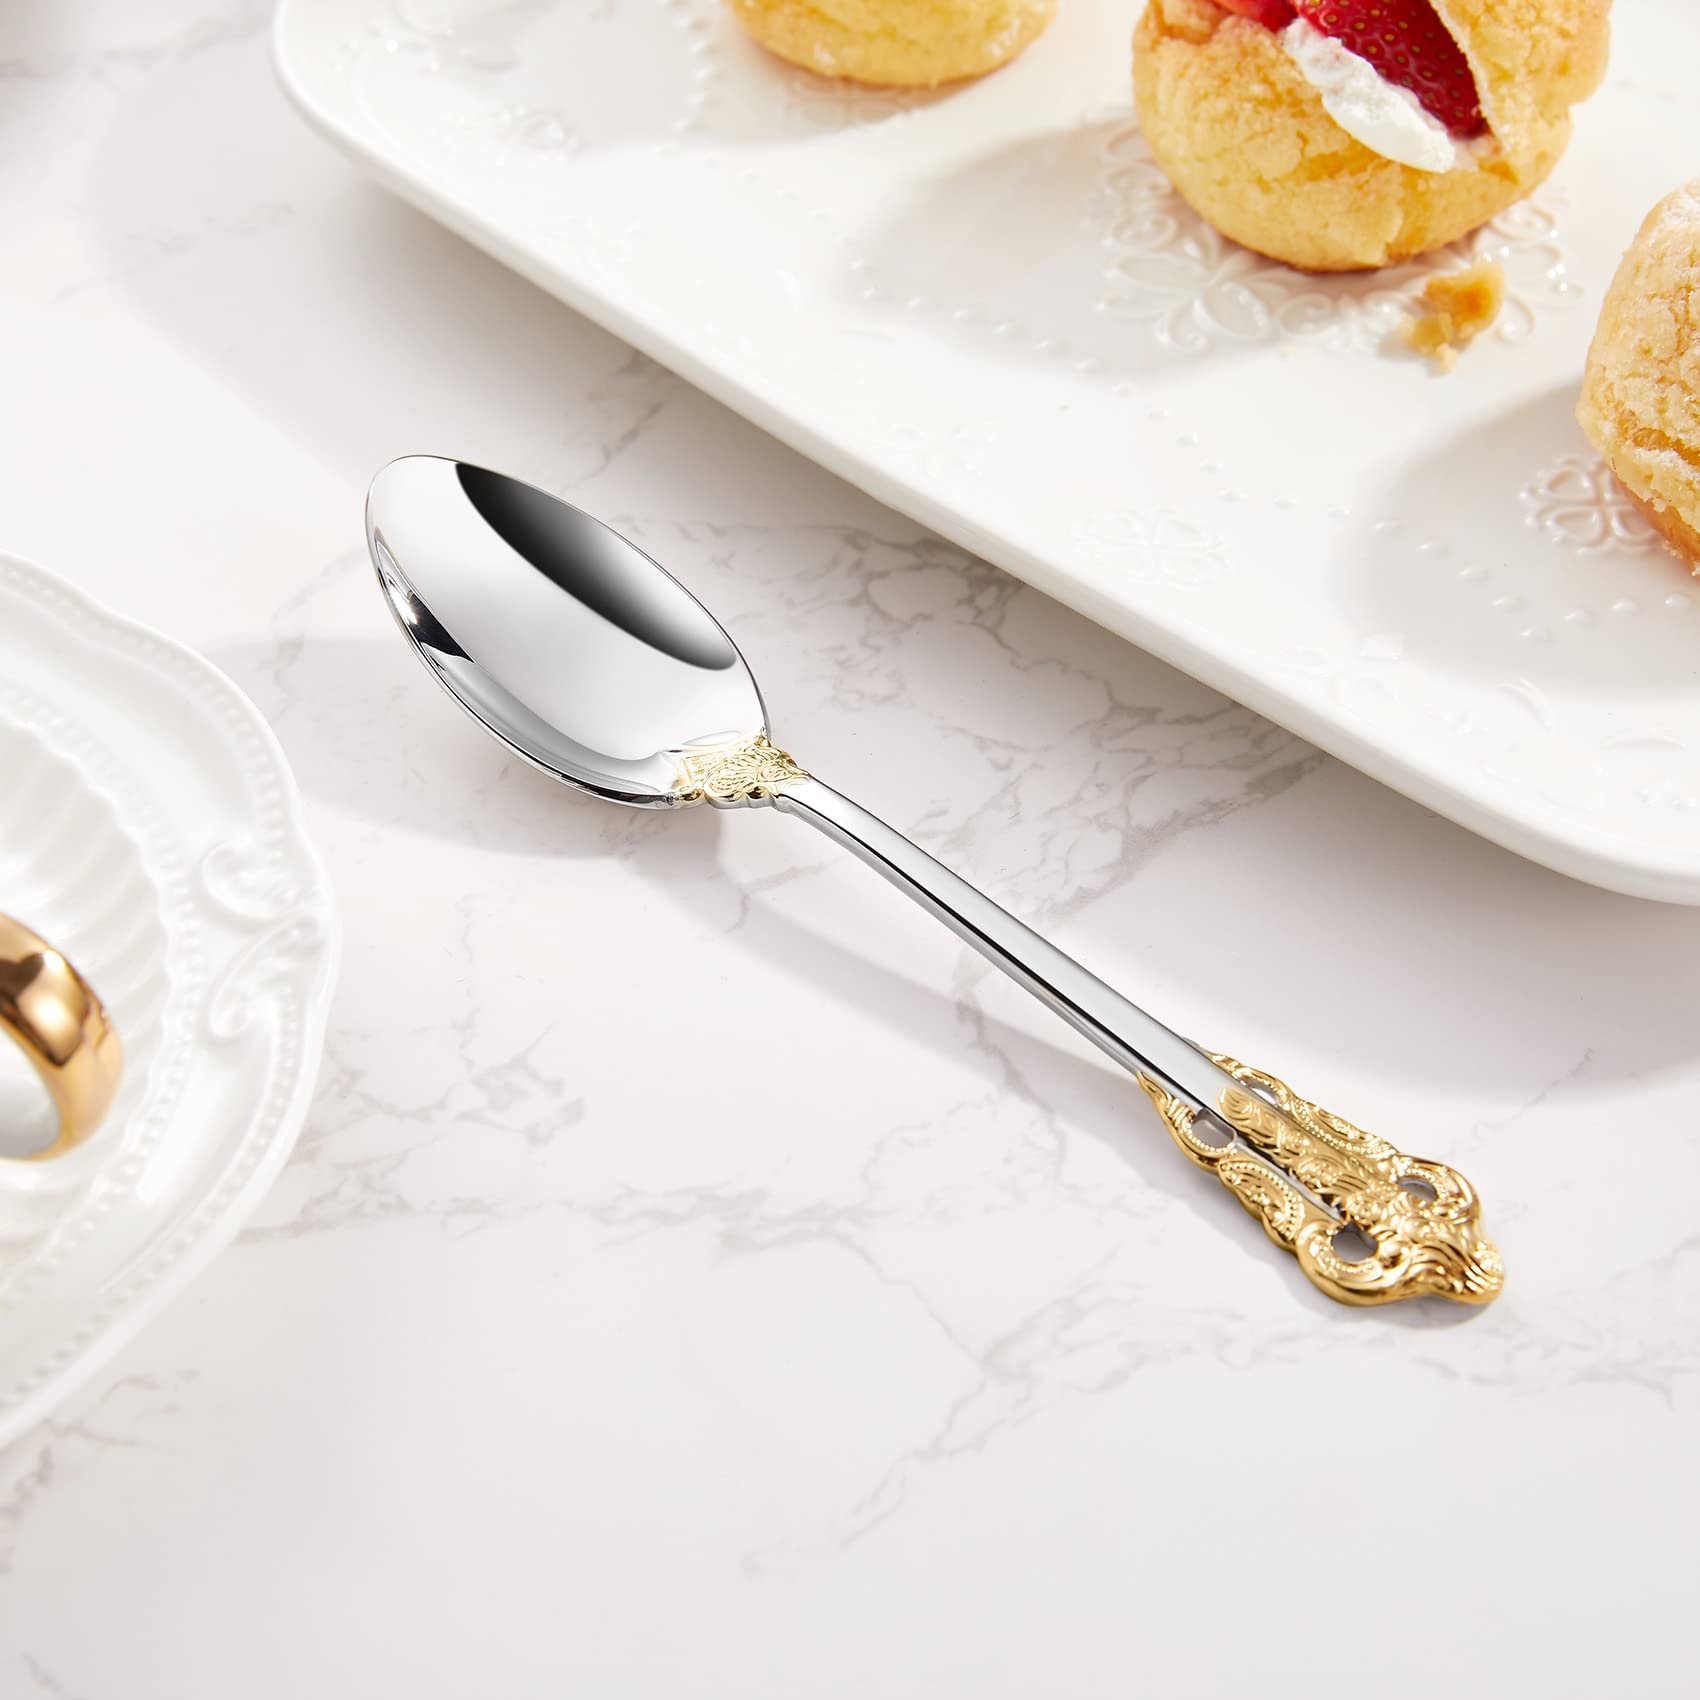 KEAWELL Luxury 6.3" Teaspoons, 18/10 Stainless Steel, Gorgeous Small Spoons, Stirring, Mixing, Sugar, Cake, Dessert Spoons, Mini Antipasto spoons (Gold Accent)